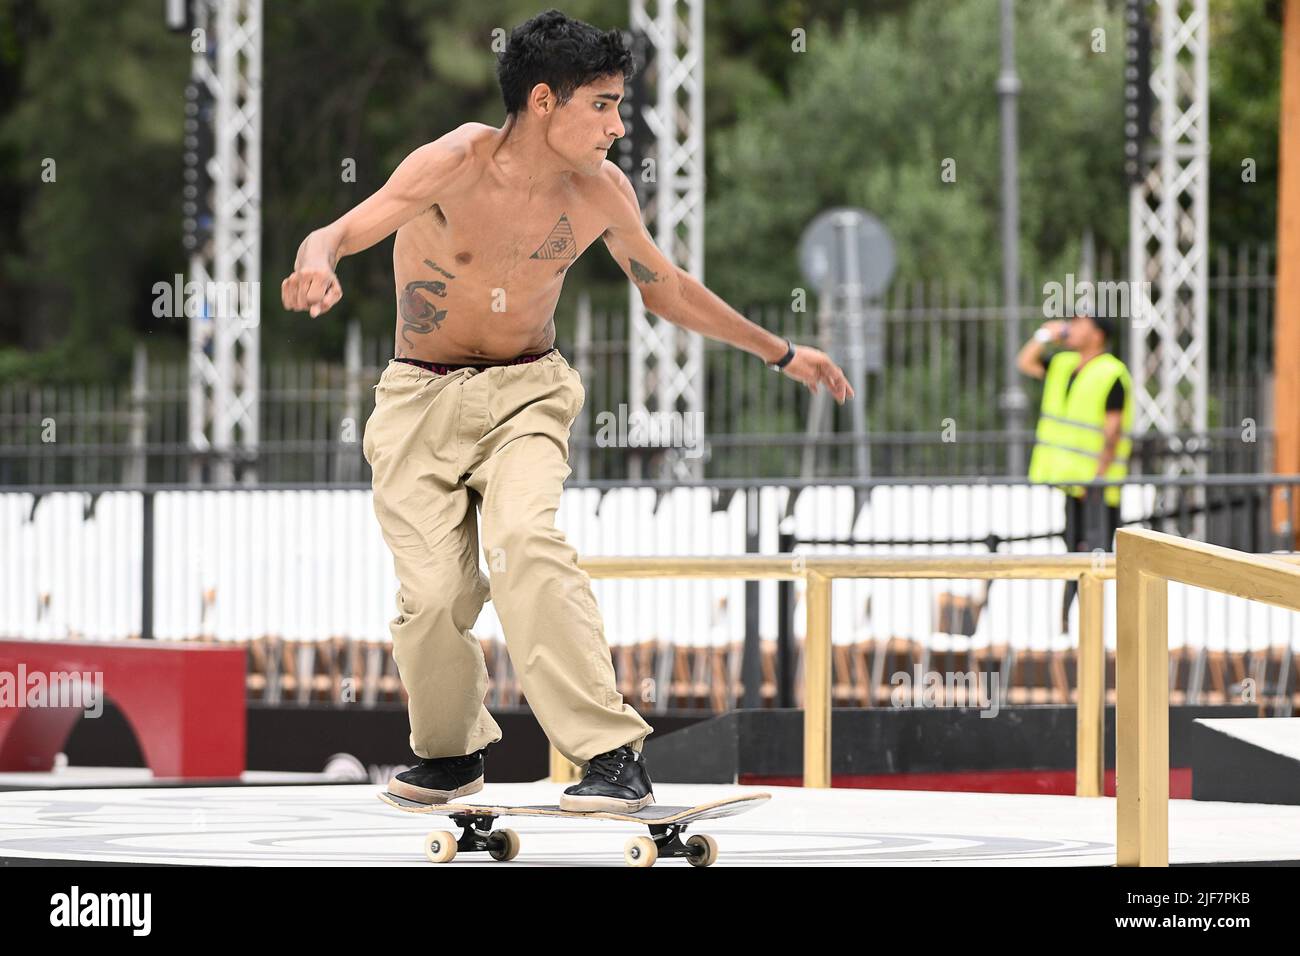 Rome, Italy. 28th June, 2022. athletes practice the course during Street Roma, Italia, at the Colle Oppio Skate Park, 28 Jun (Photo by AllShotLive/Sipa USA) Credit: Sipa USA/Alamy Live News